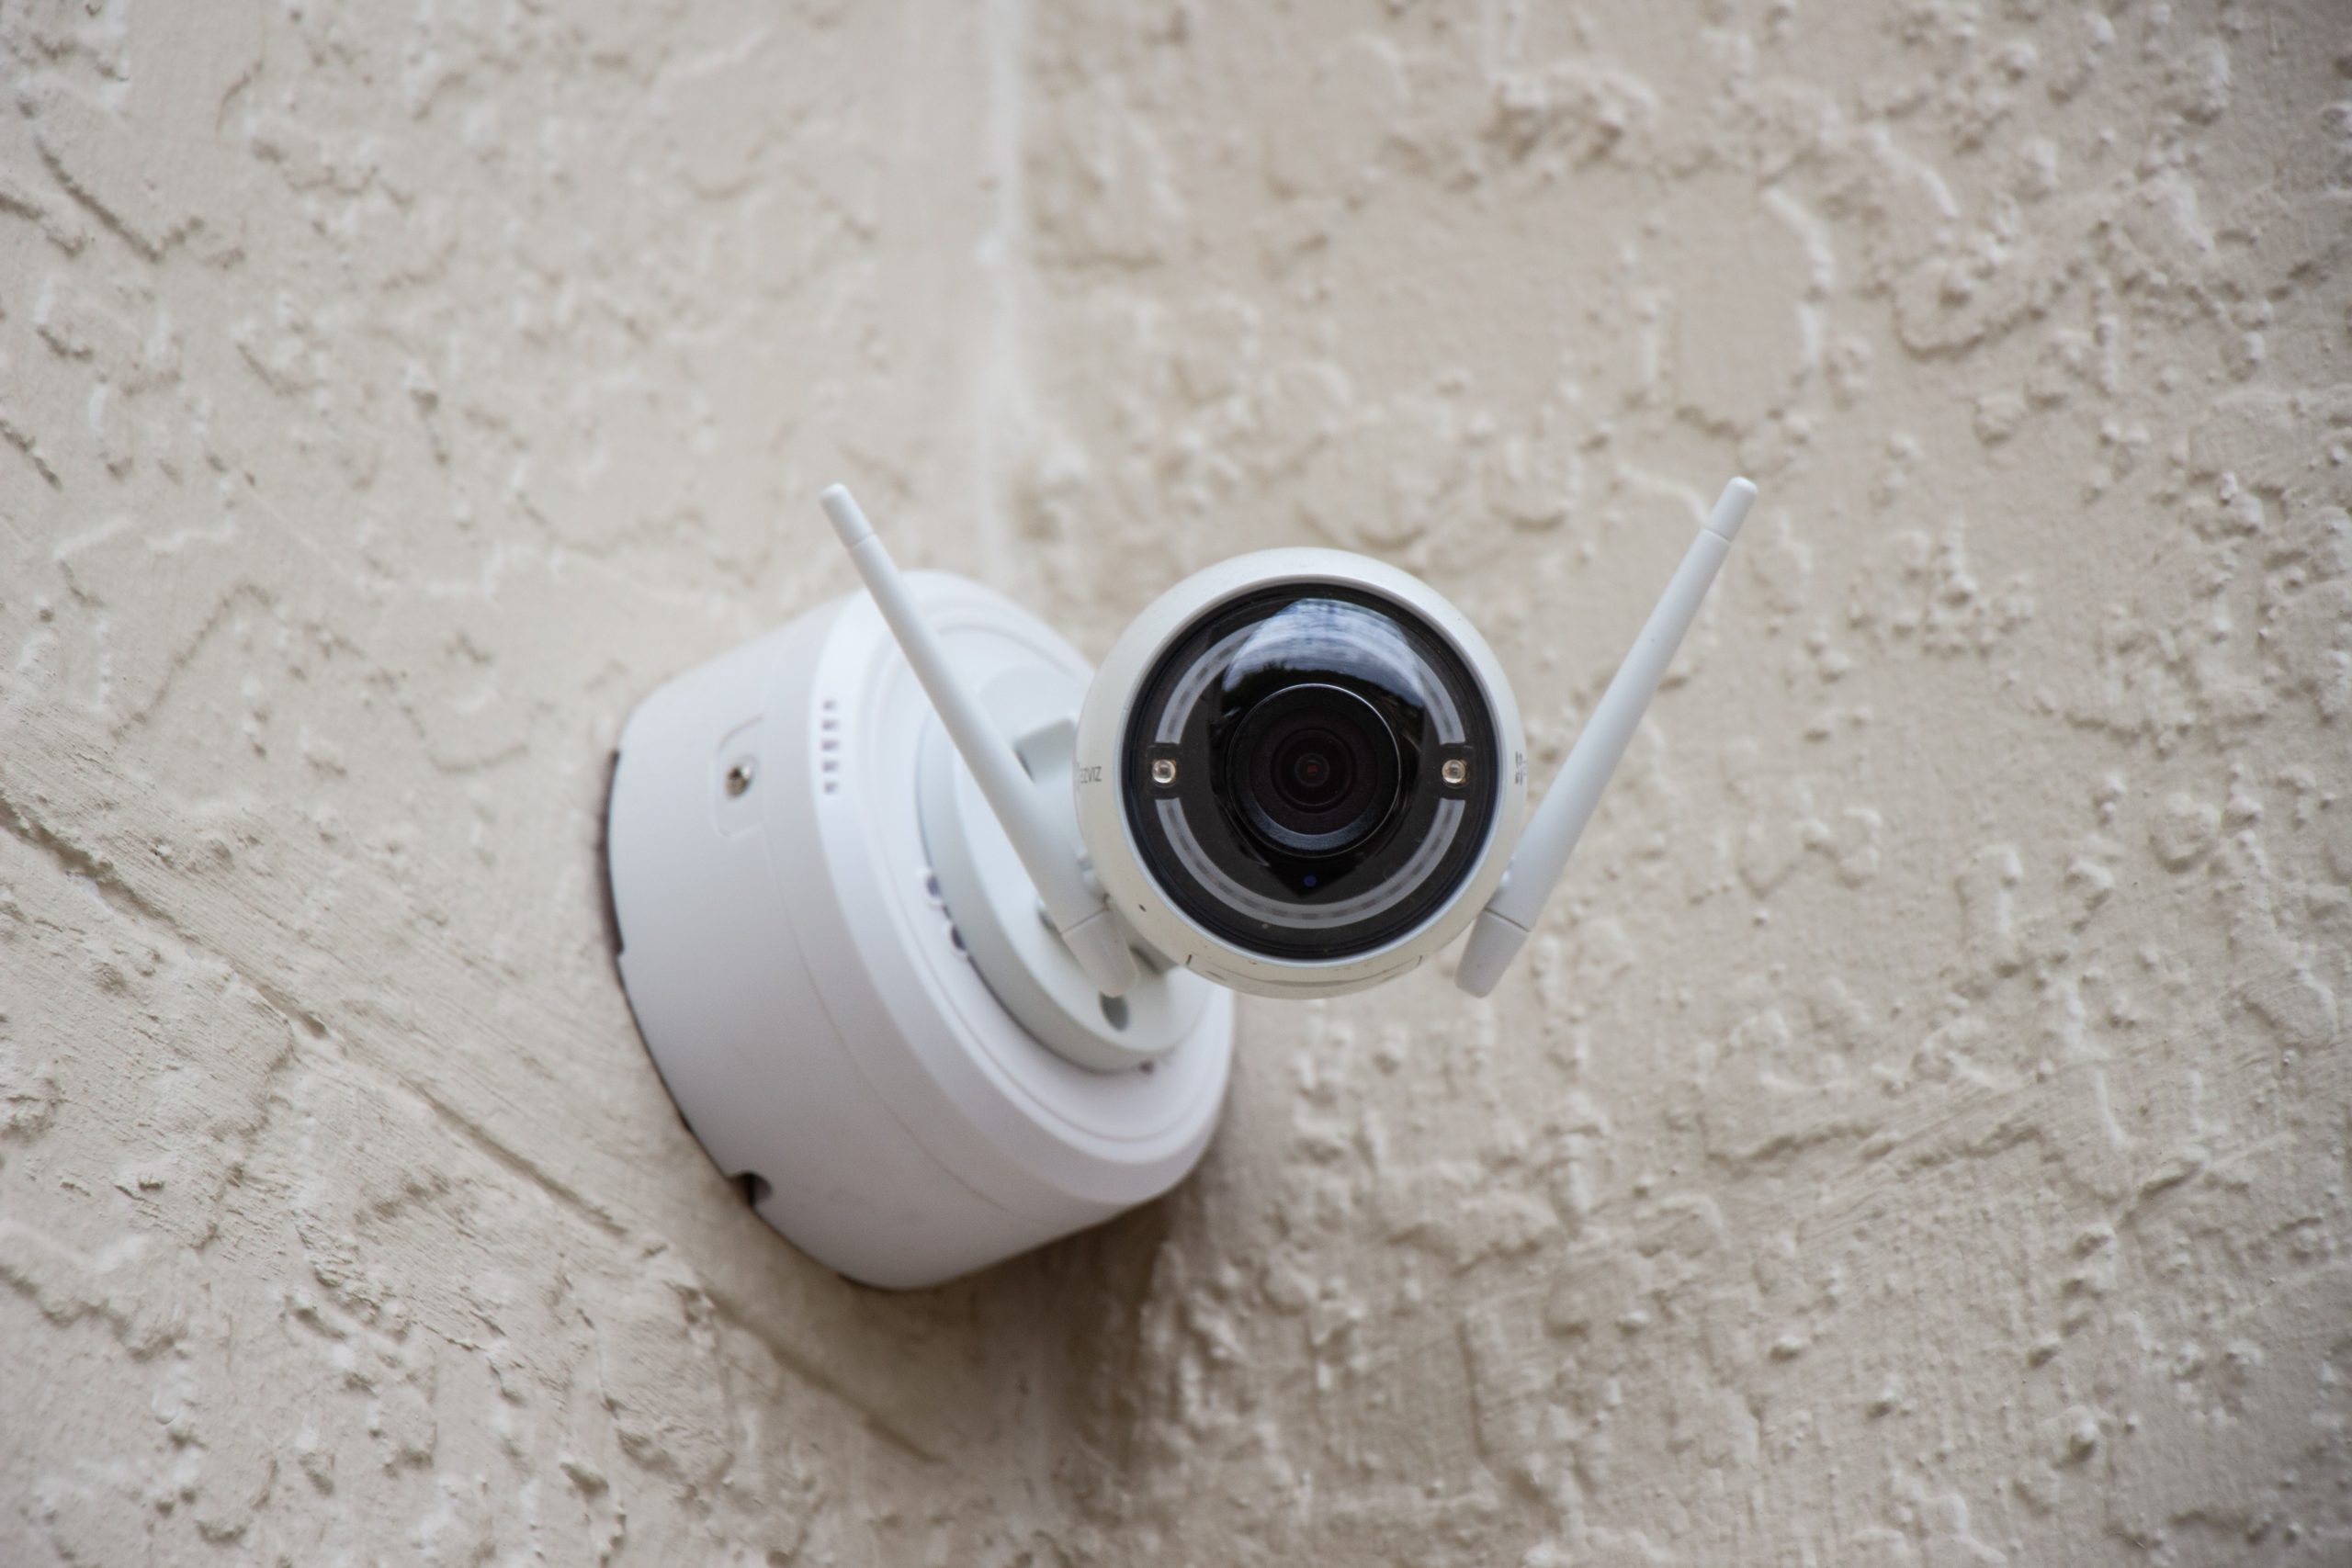 A home surveillance camera attached to the outside corner of a builder pointed towards the viewer.